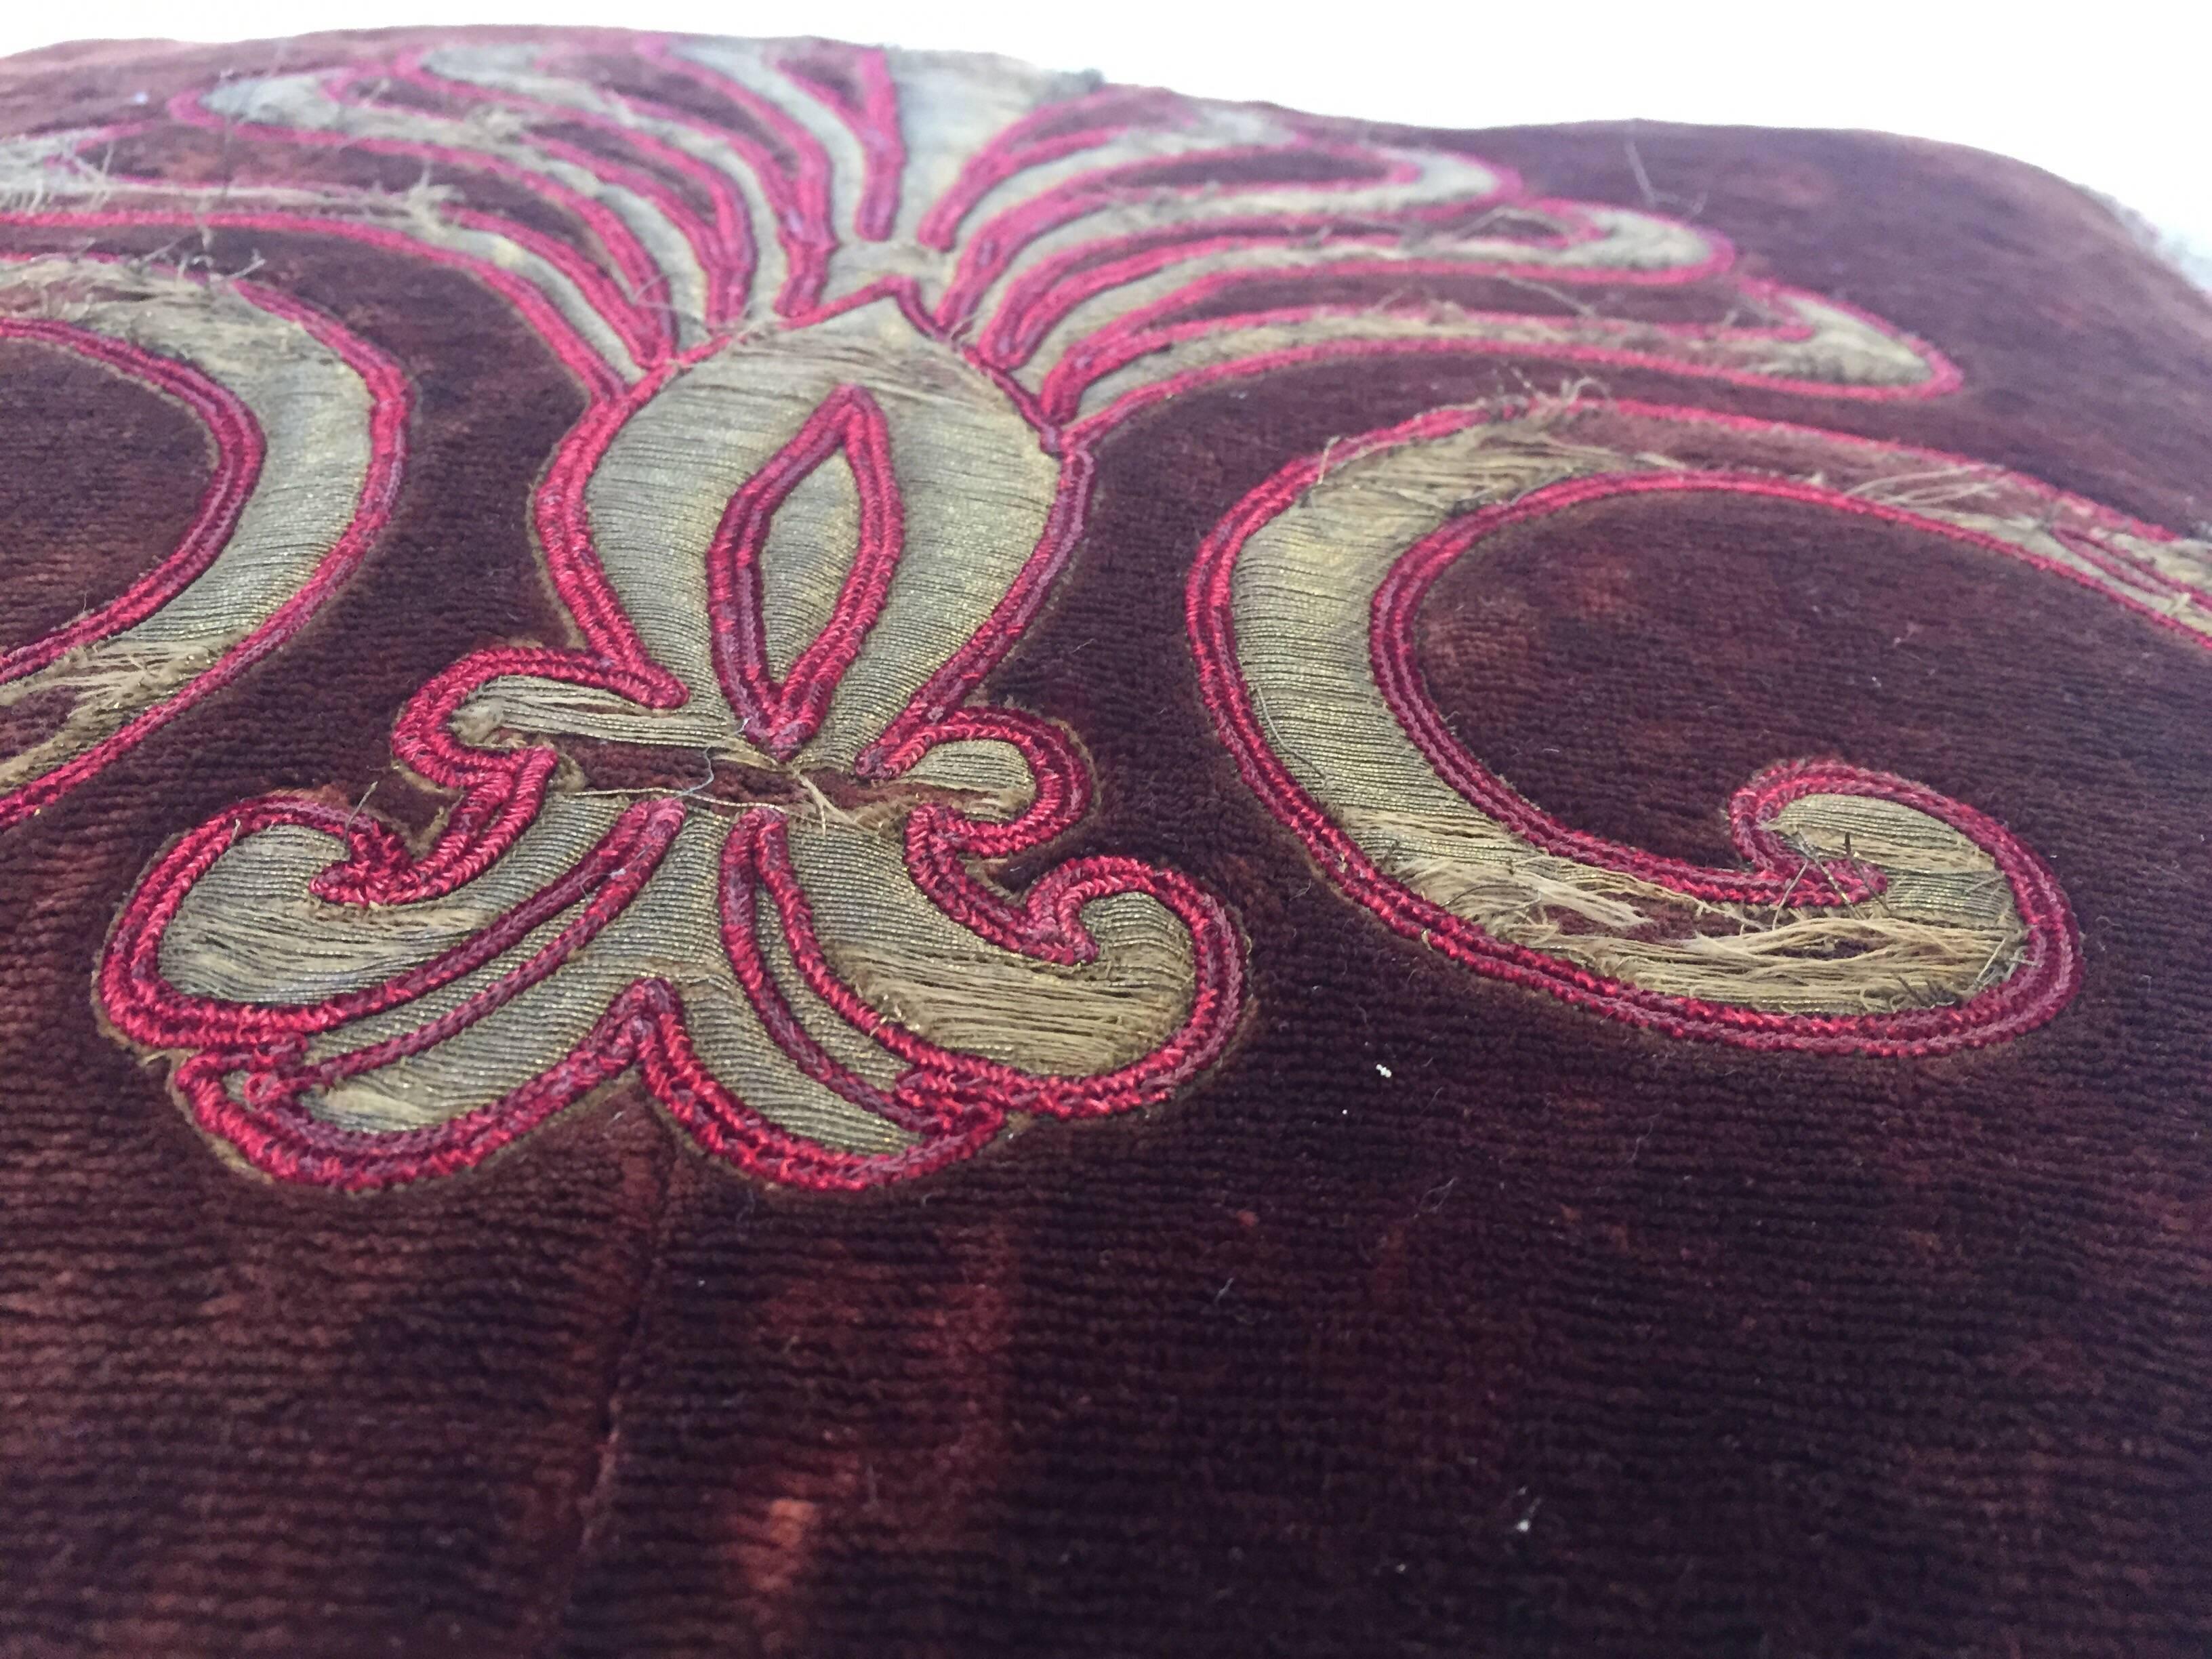 Embroidered 19th Century Silk Velvet Antique Textile Fragment Framed into a Pillow